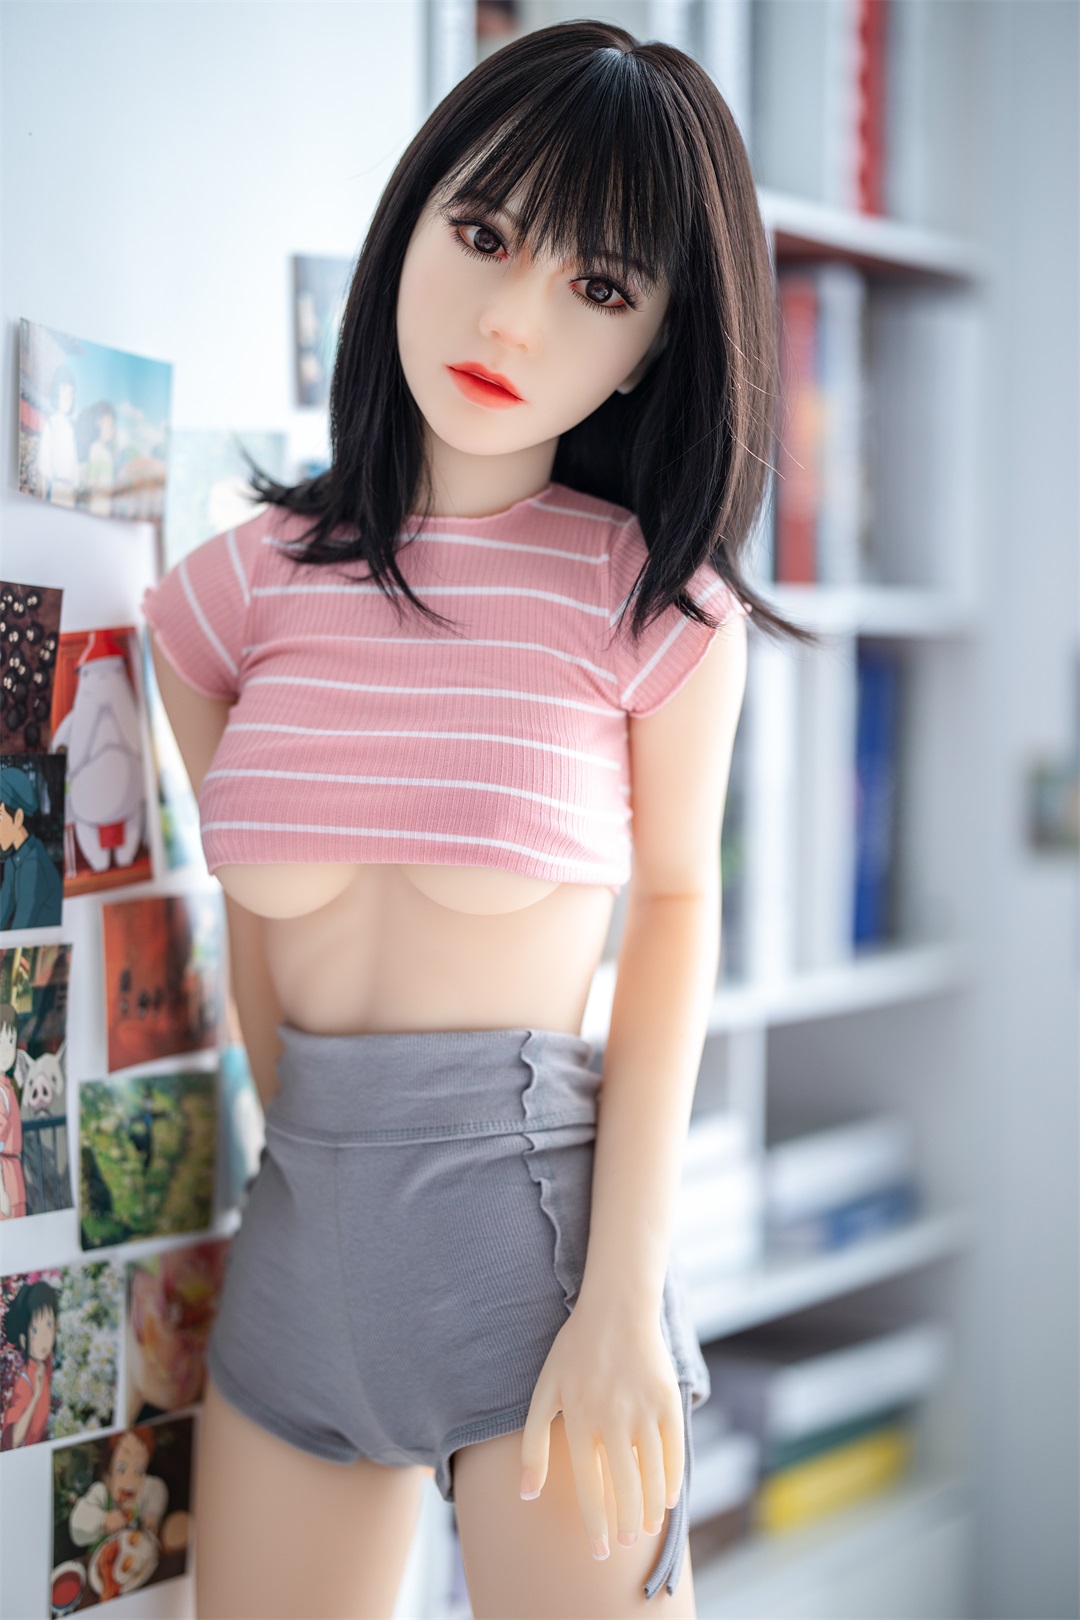 Libert - 4ft 11 / 150cm Asian Style Small Breast Realistic Sex Doll (5 sizes)